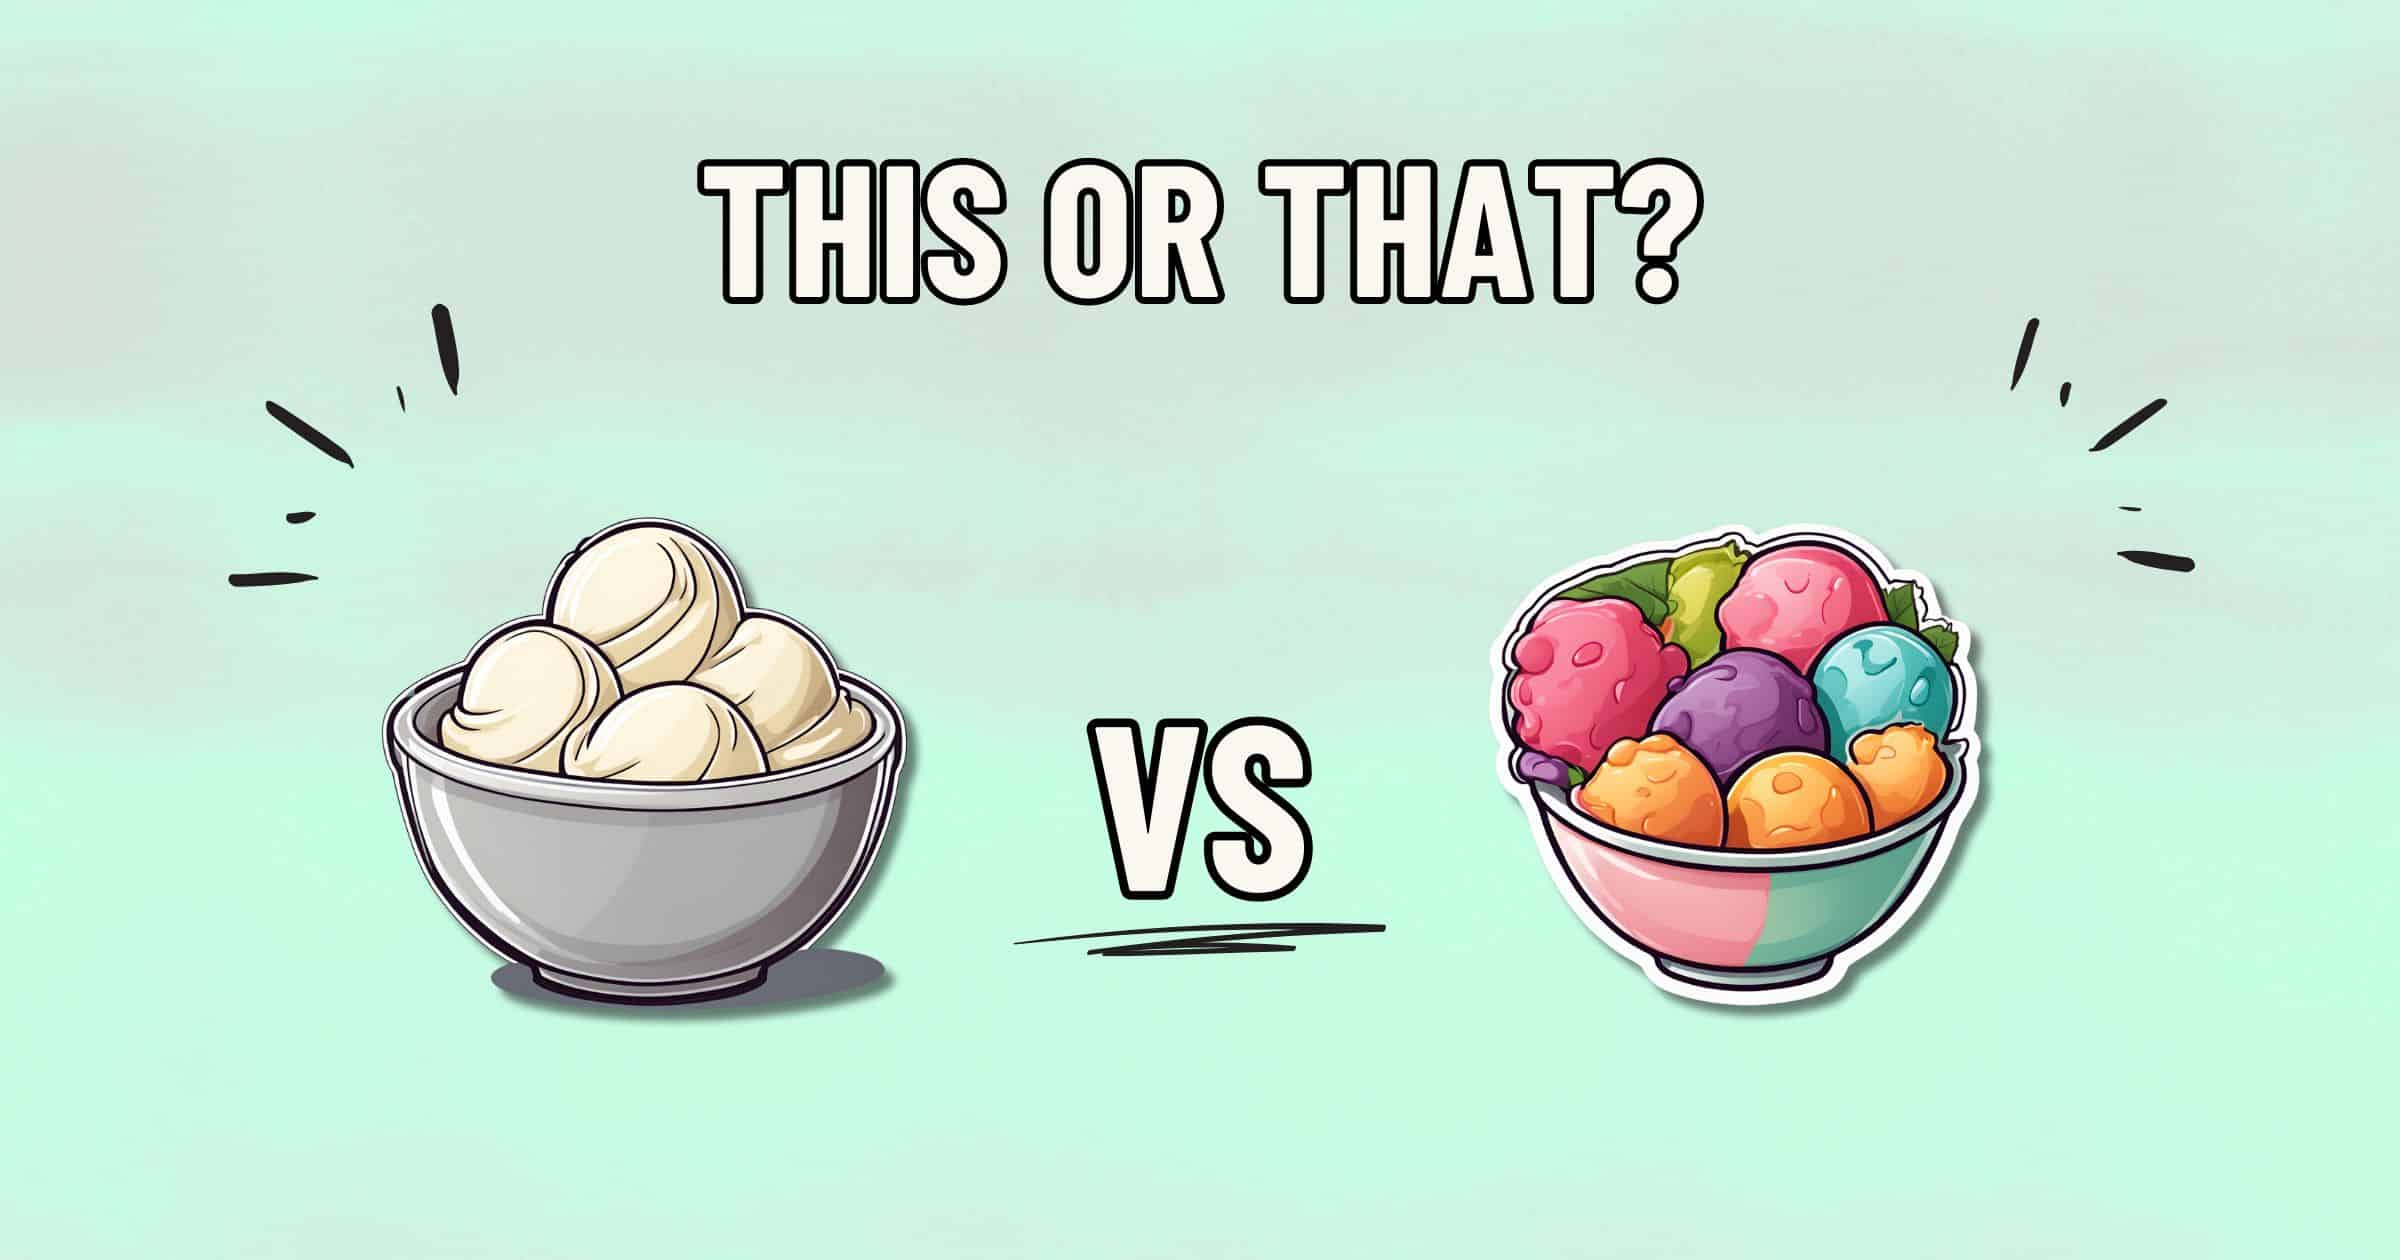 A graphic with the text "THIS OR THAT?" at the top. Below, there is an illustration of a bowl of white ice cream scoops on the left and a bowl of colorful fruit sorbet scoops on the right, separated by "VS" in the center. The background is a light mint green. Which one will you choose for a healthier treat?